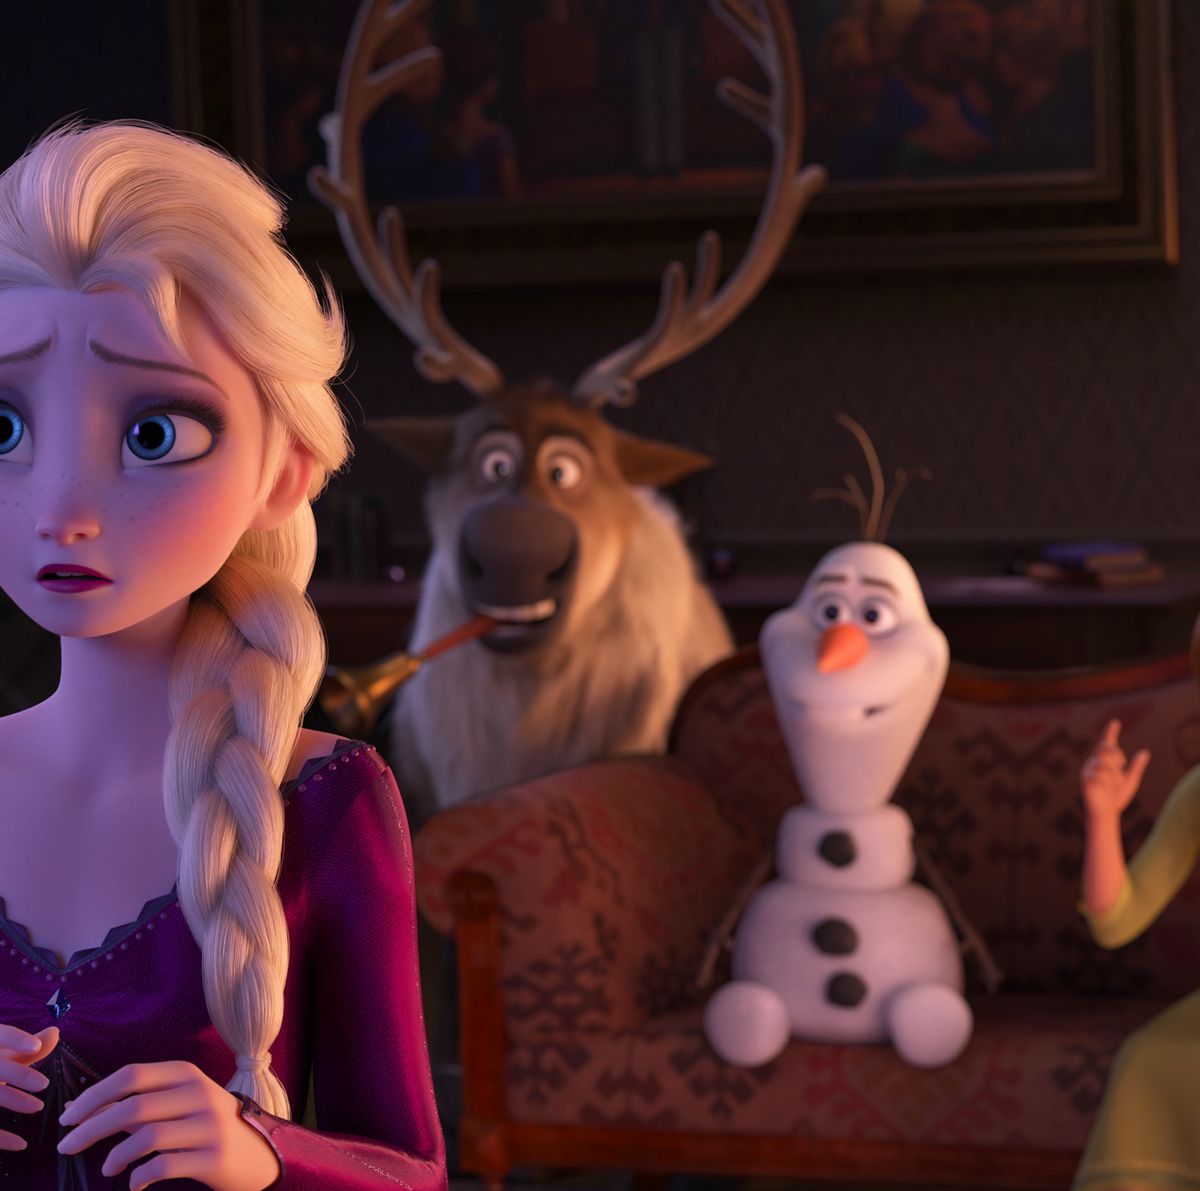 Frozen potential release date, plot and more